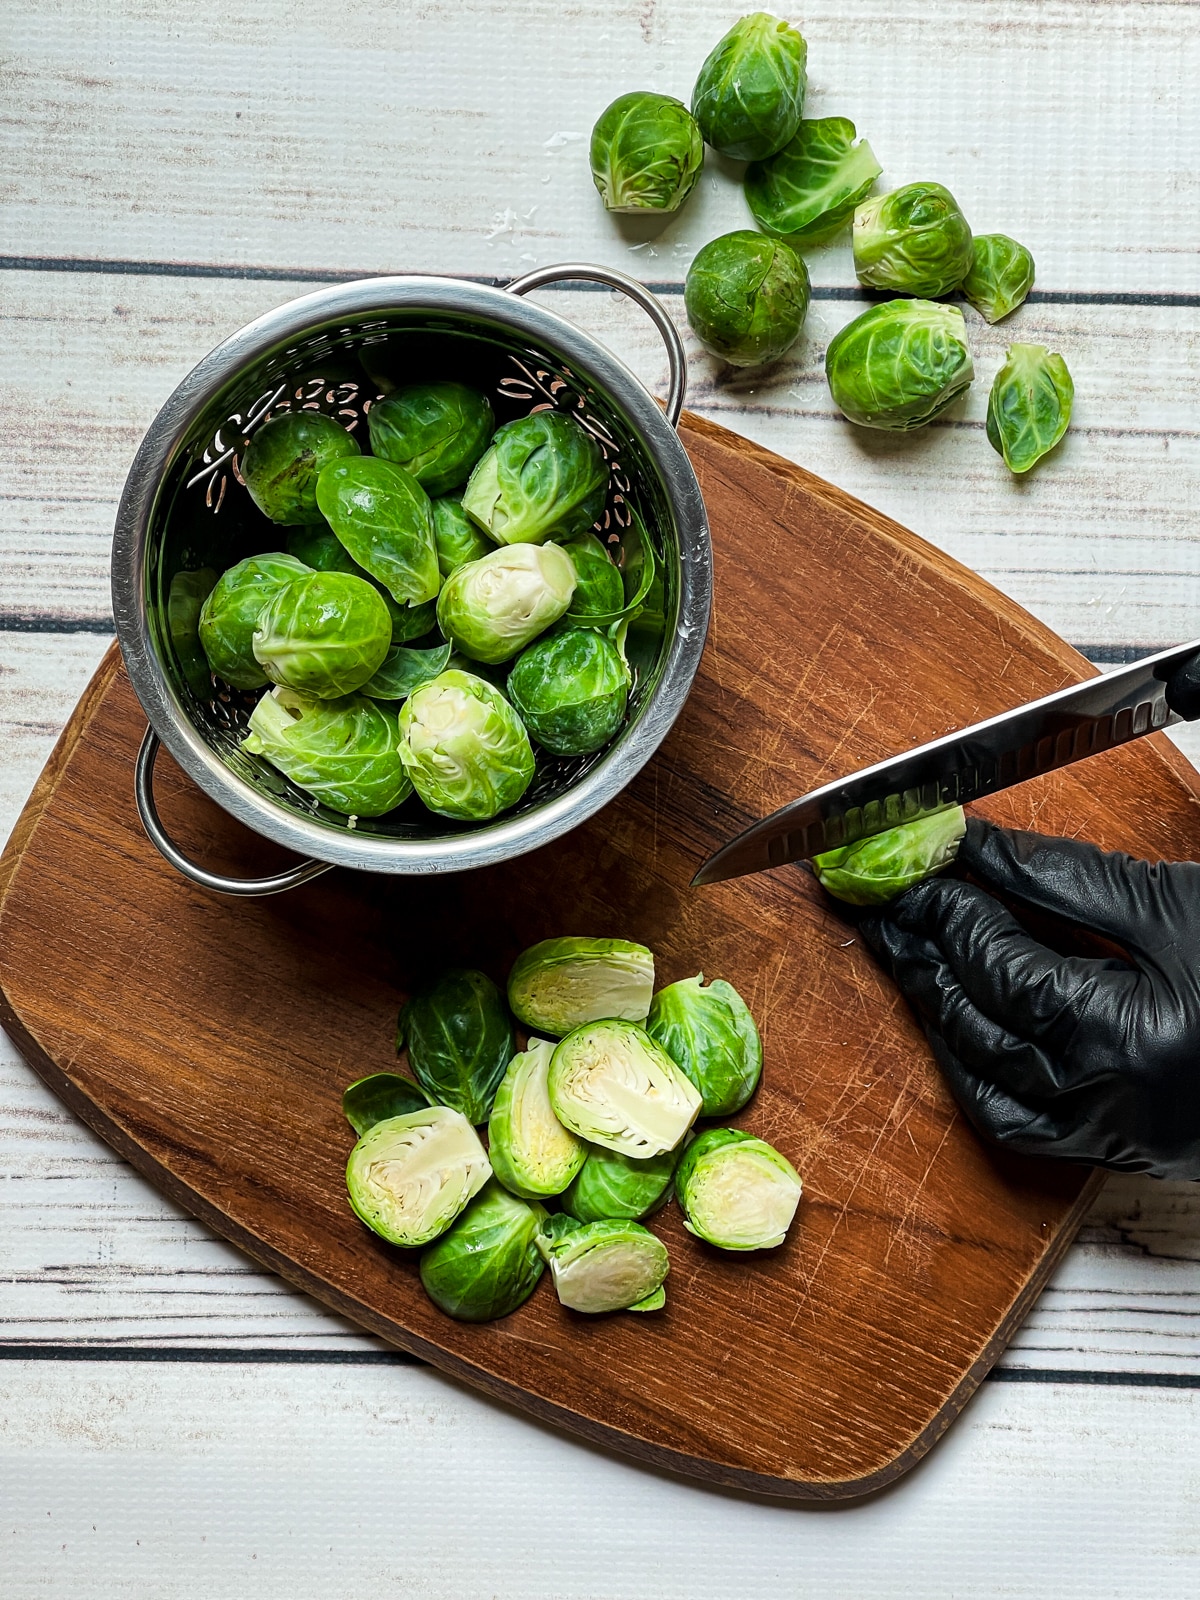 A hand slicing raw brussels sprouts in half on top of a wooden cutting board, with whole brussels sprouts on the side on top of a white board.